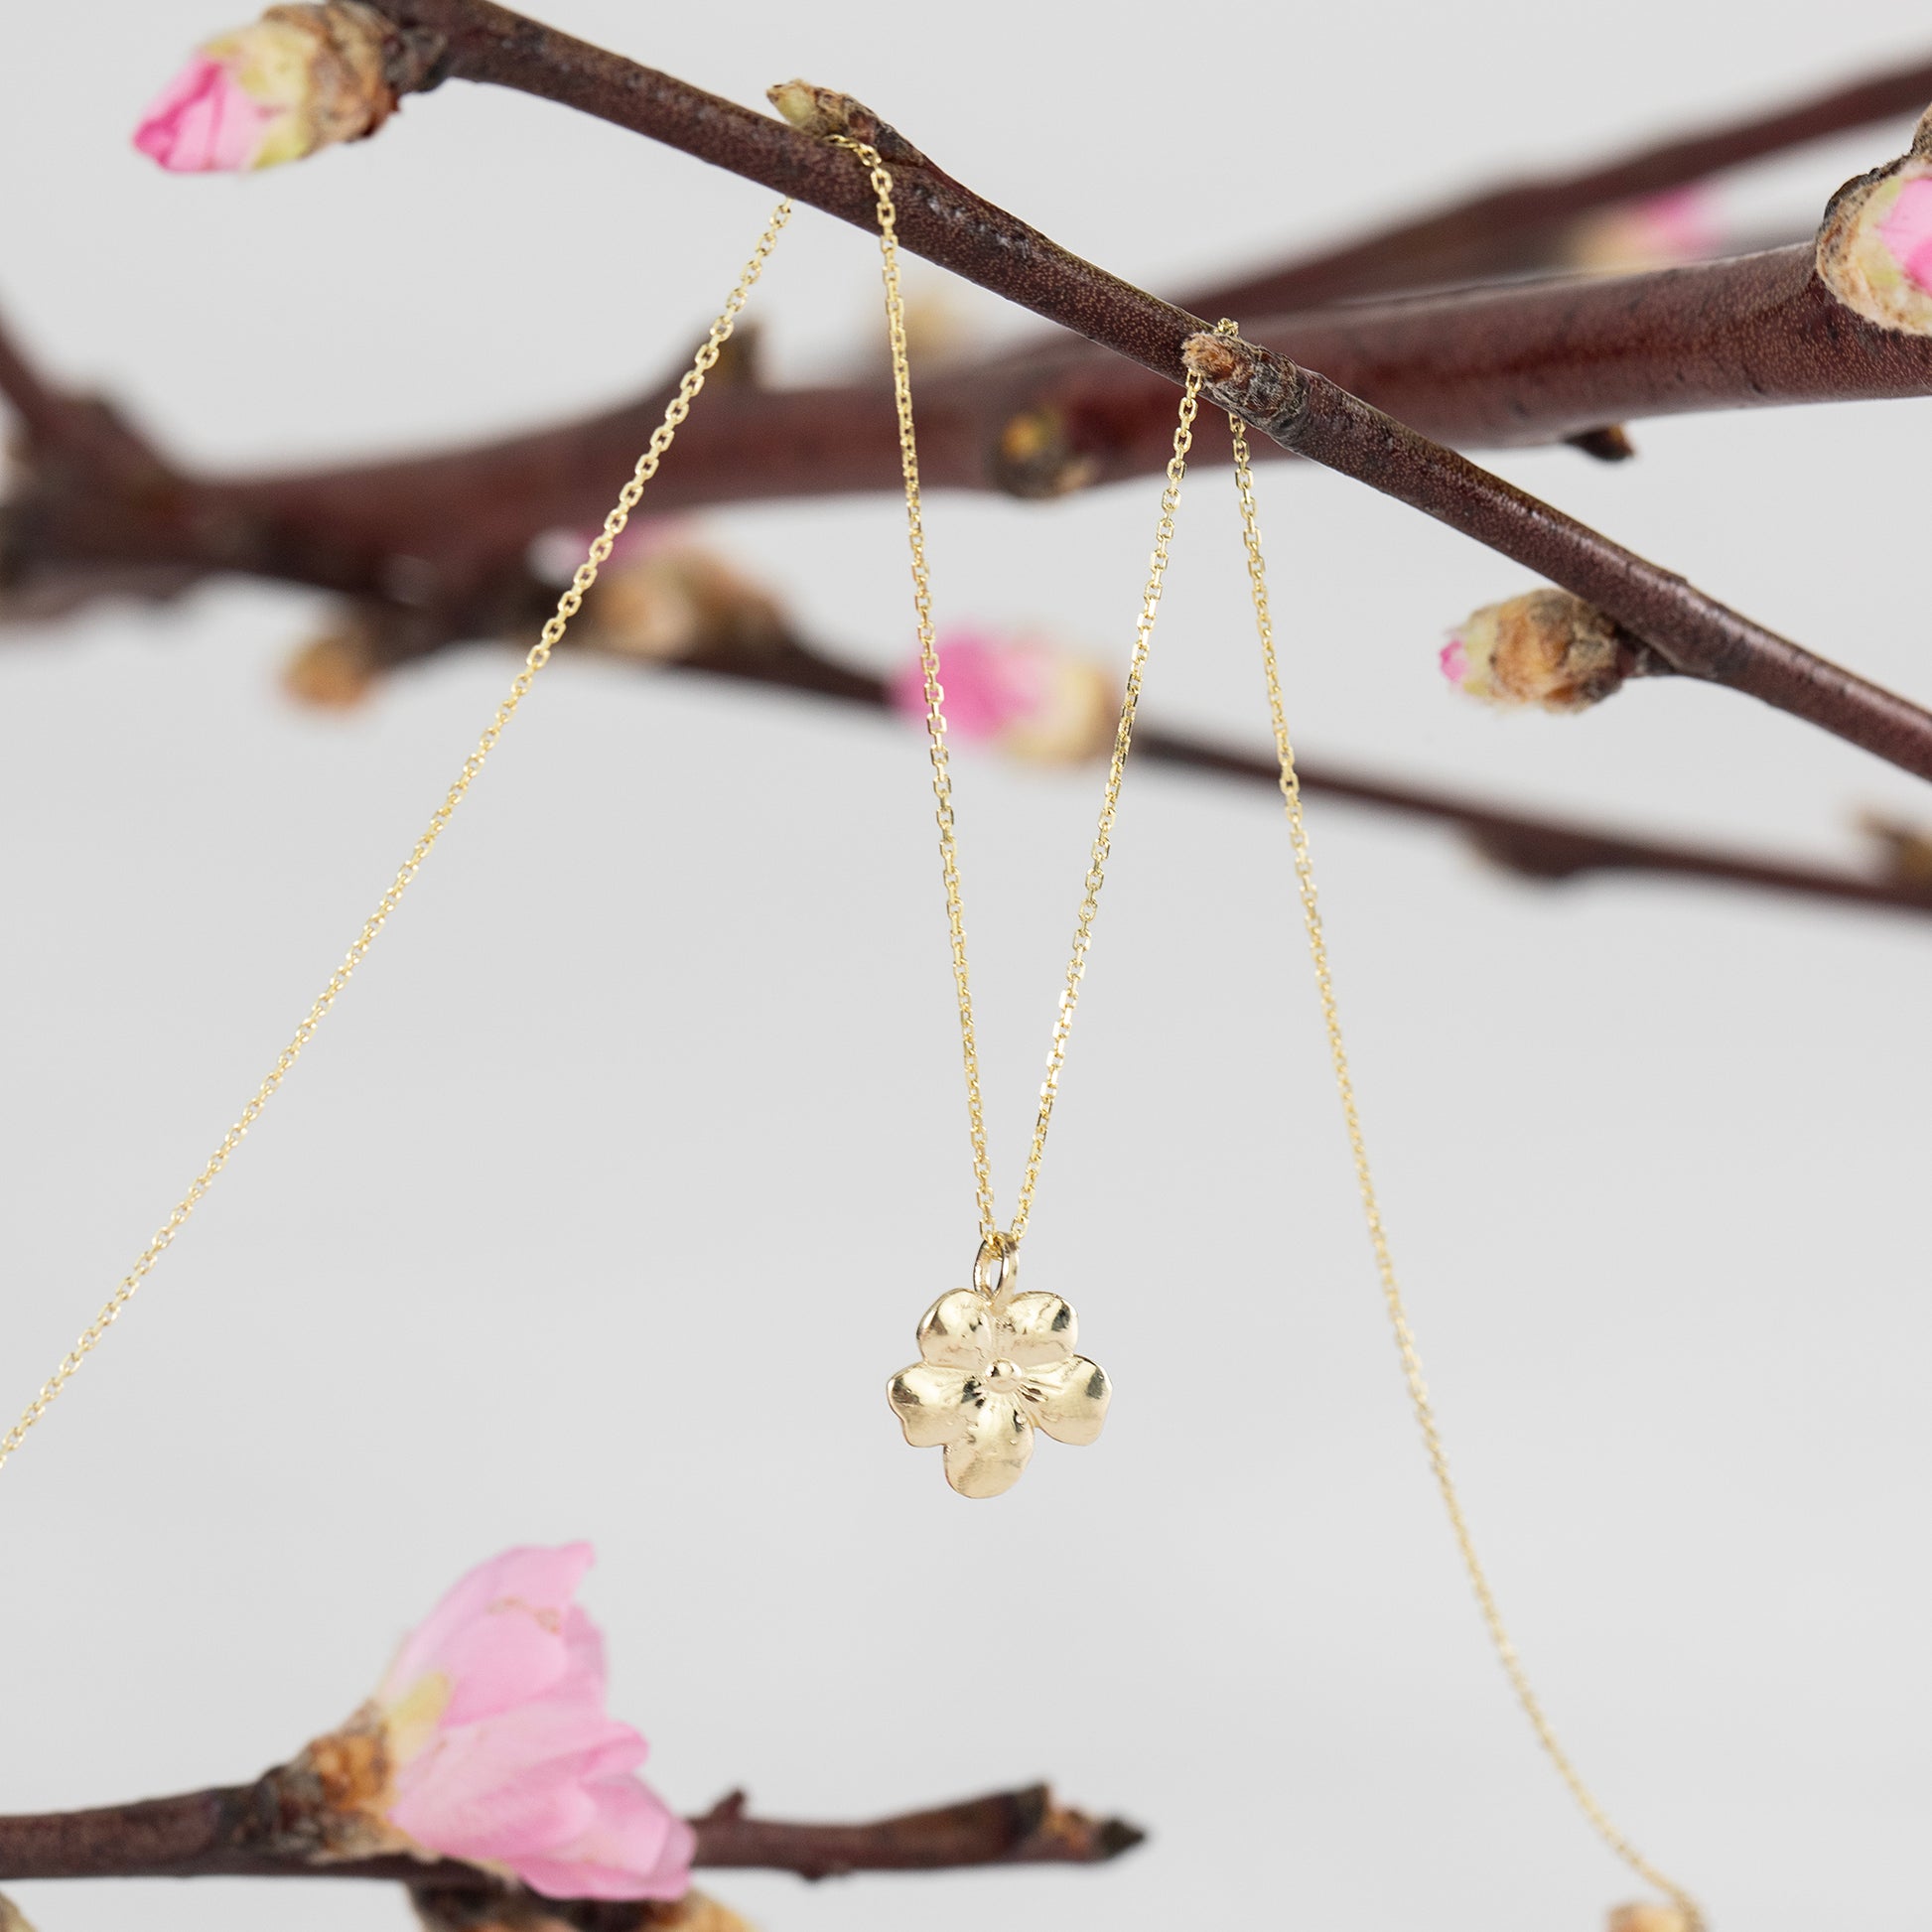 Cherry Blossom Necklace - 9kt Gold